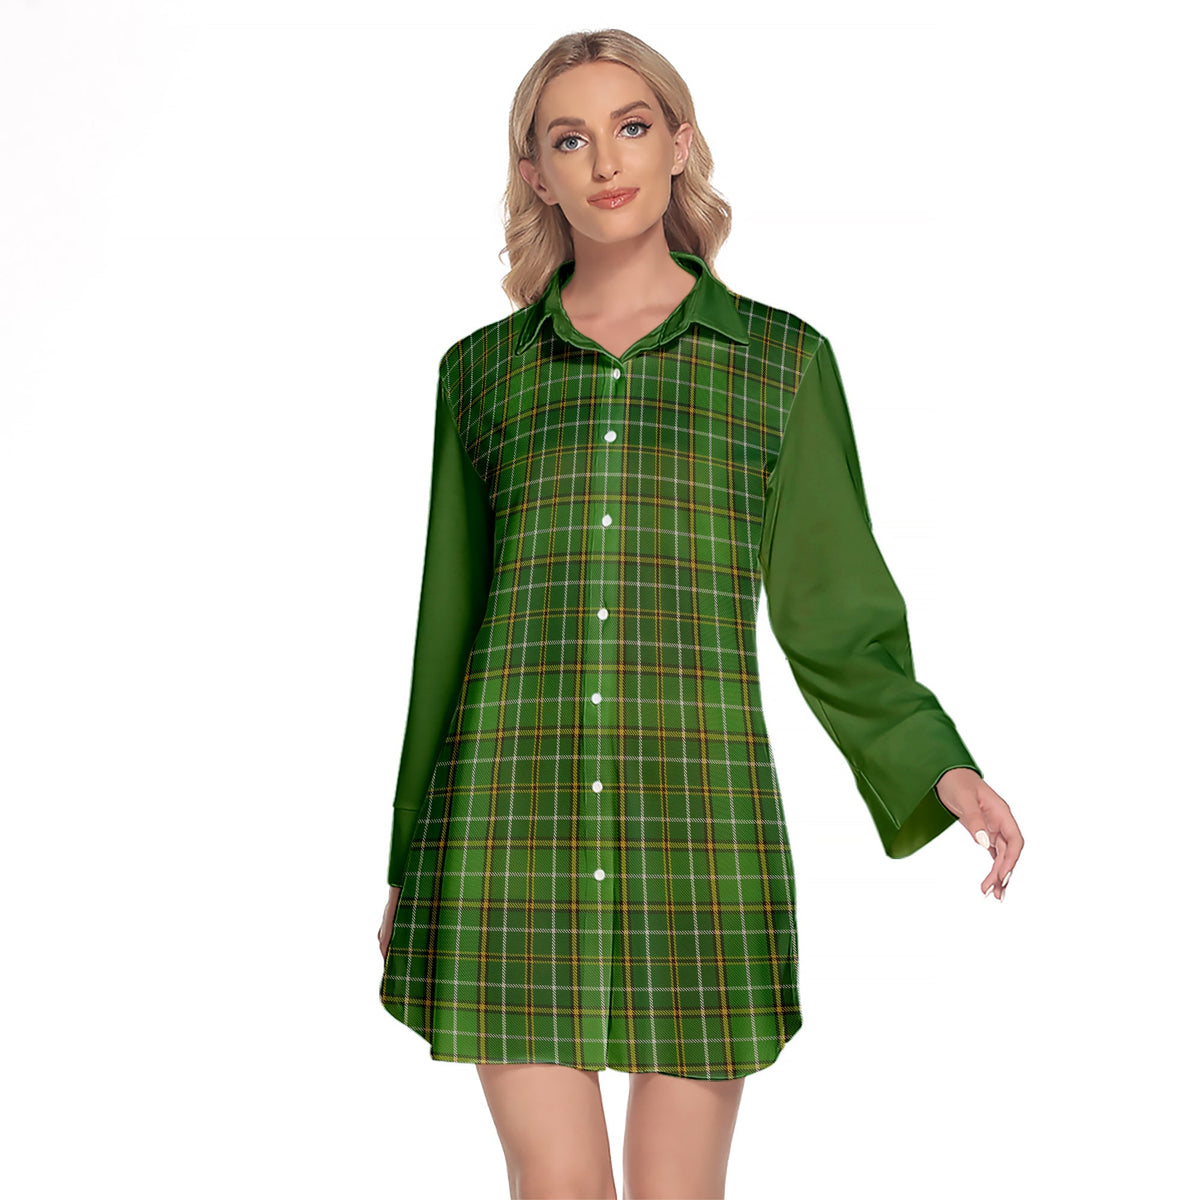 Forrester Or Foster Hunting Tartan Women's Lapel Shirt Dress With Long Sleeve